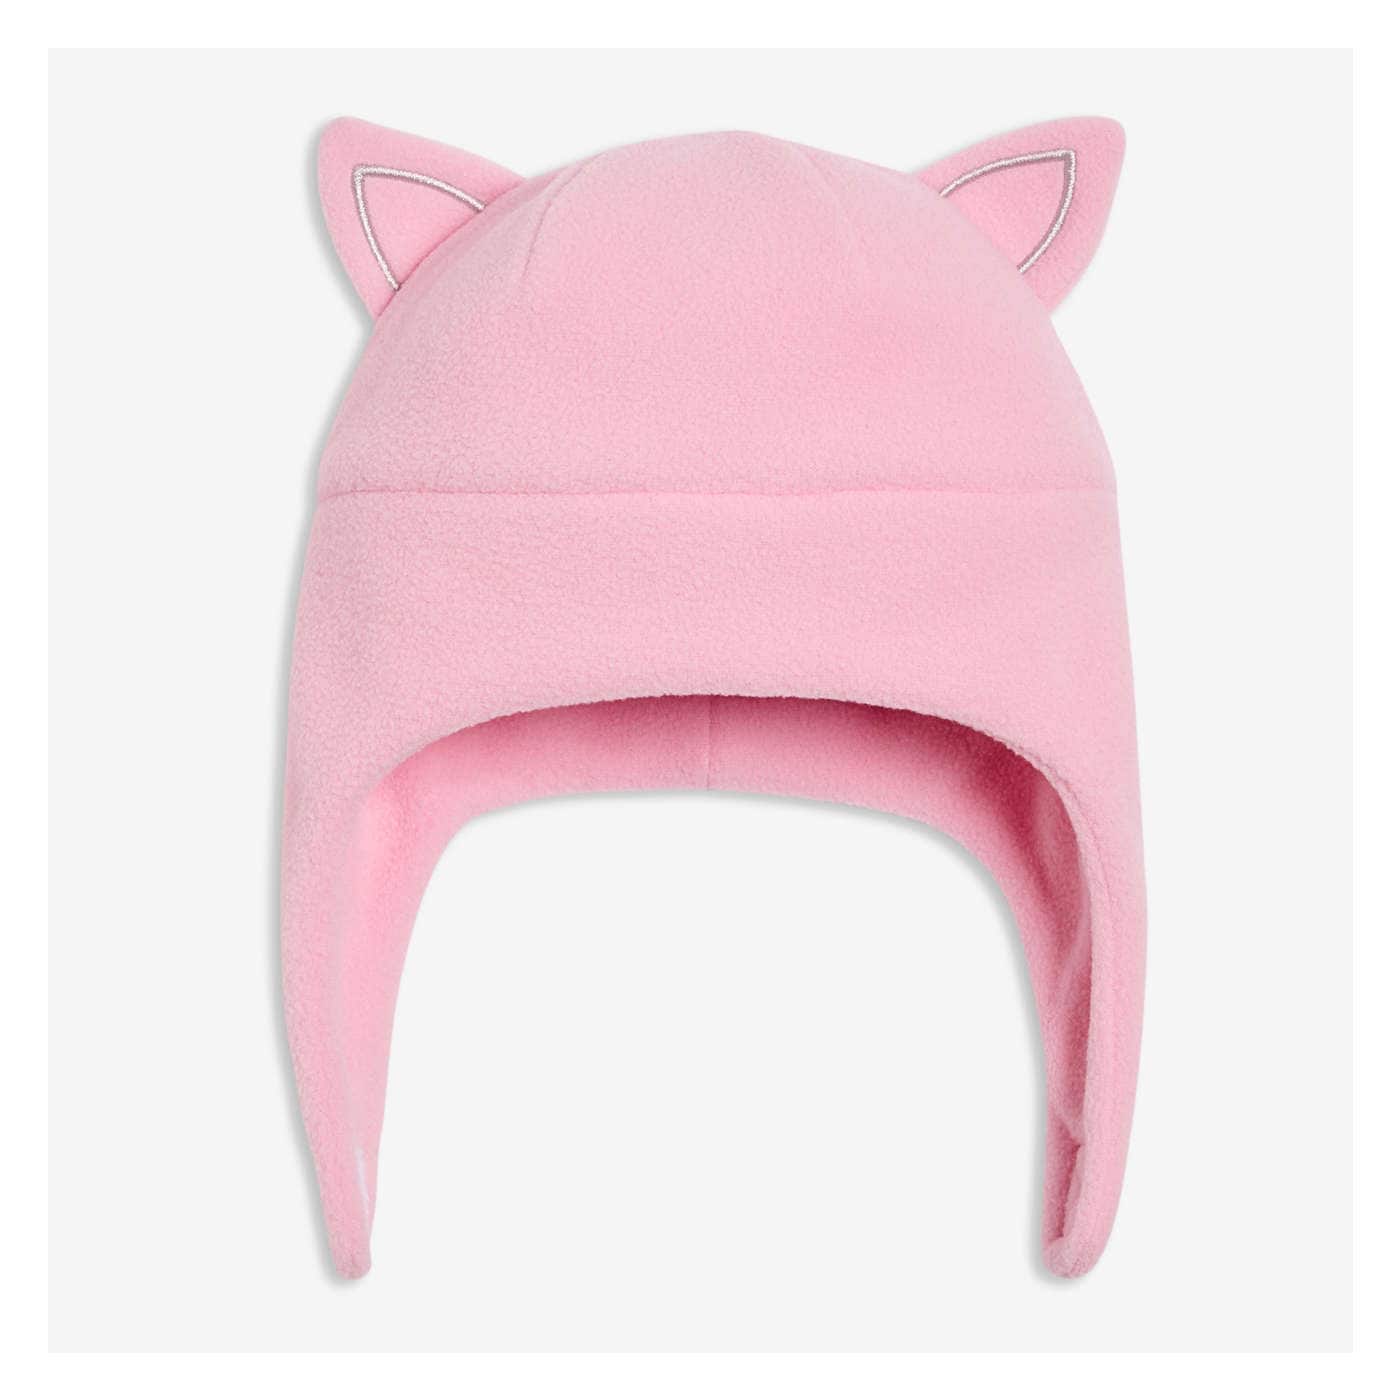 Toddler Girls' Cat Trapper Hat in Pink from Joe Fresh